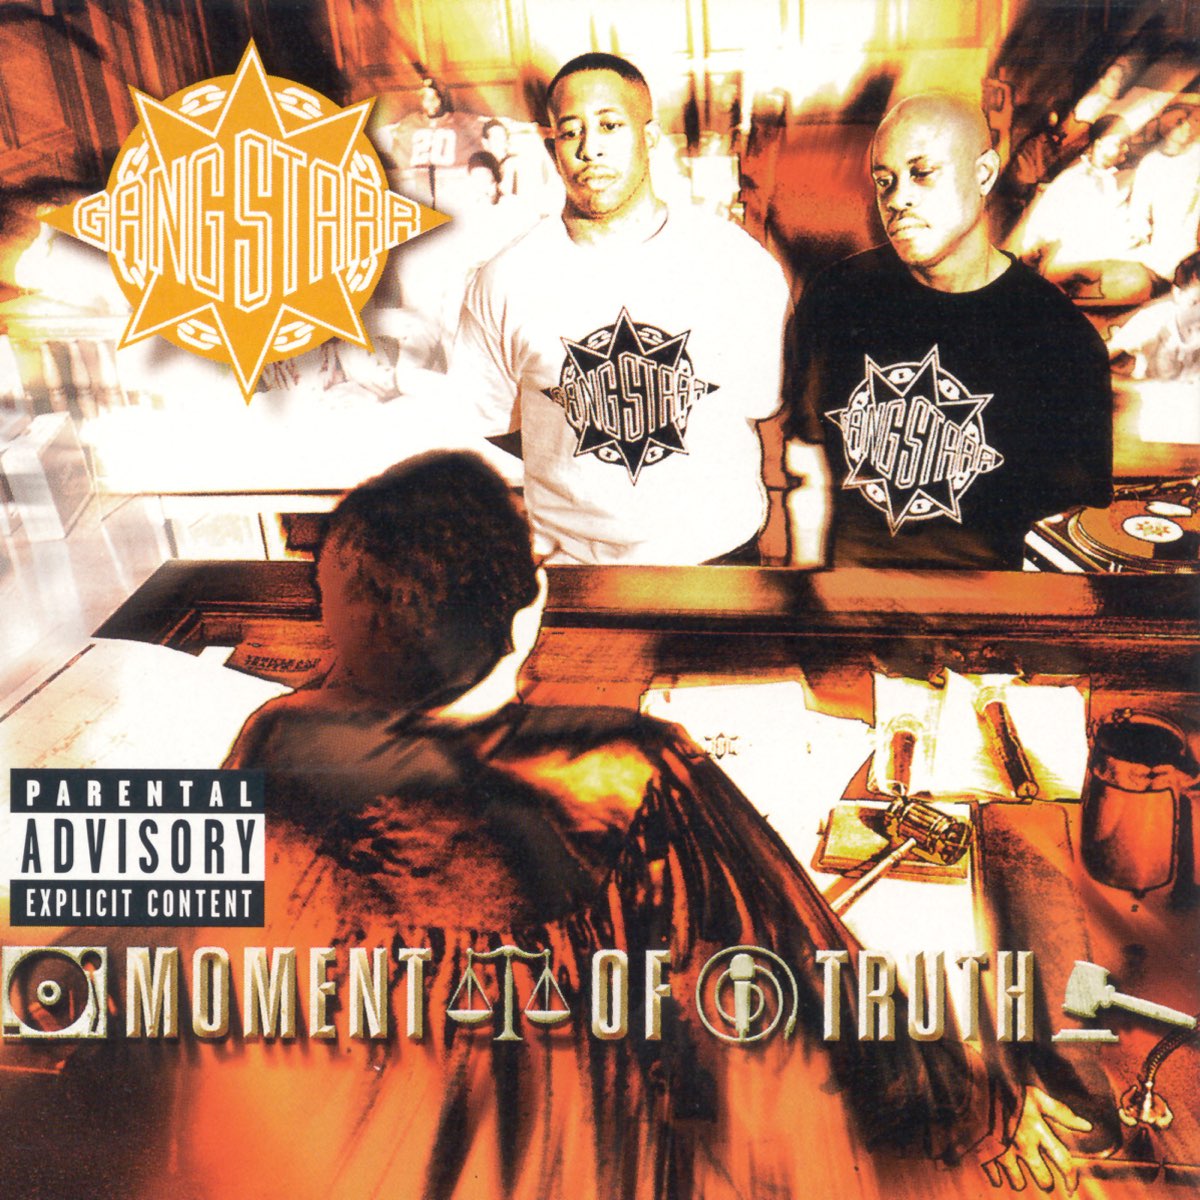 ‎Moment of Truth by Gang Starr on Apple Music